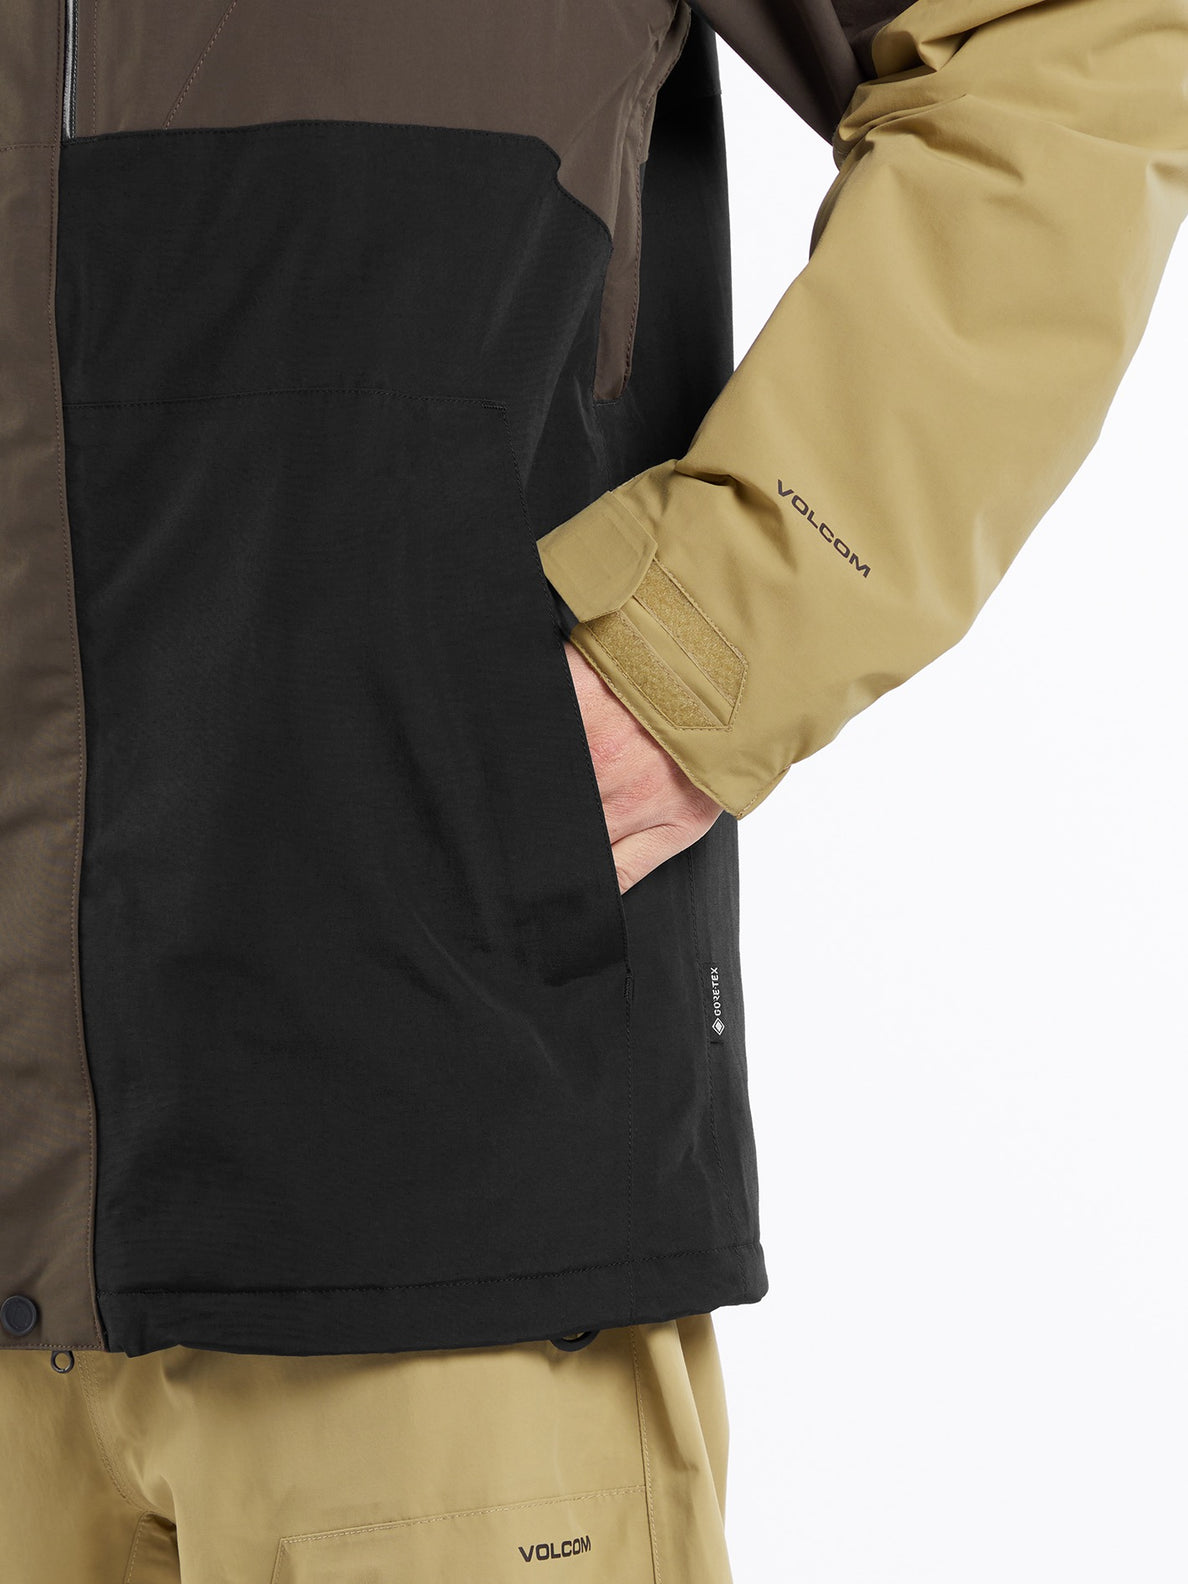 L Insulated Gore-Tex Jacket - BROWN (G0452403_BRN) [39]